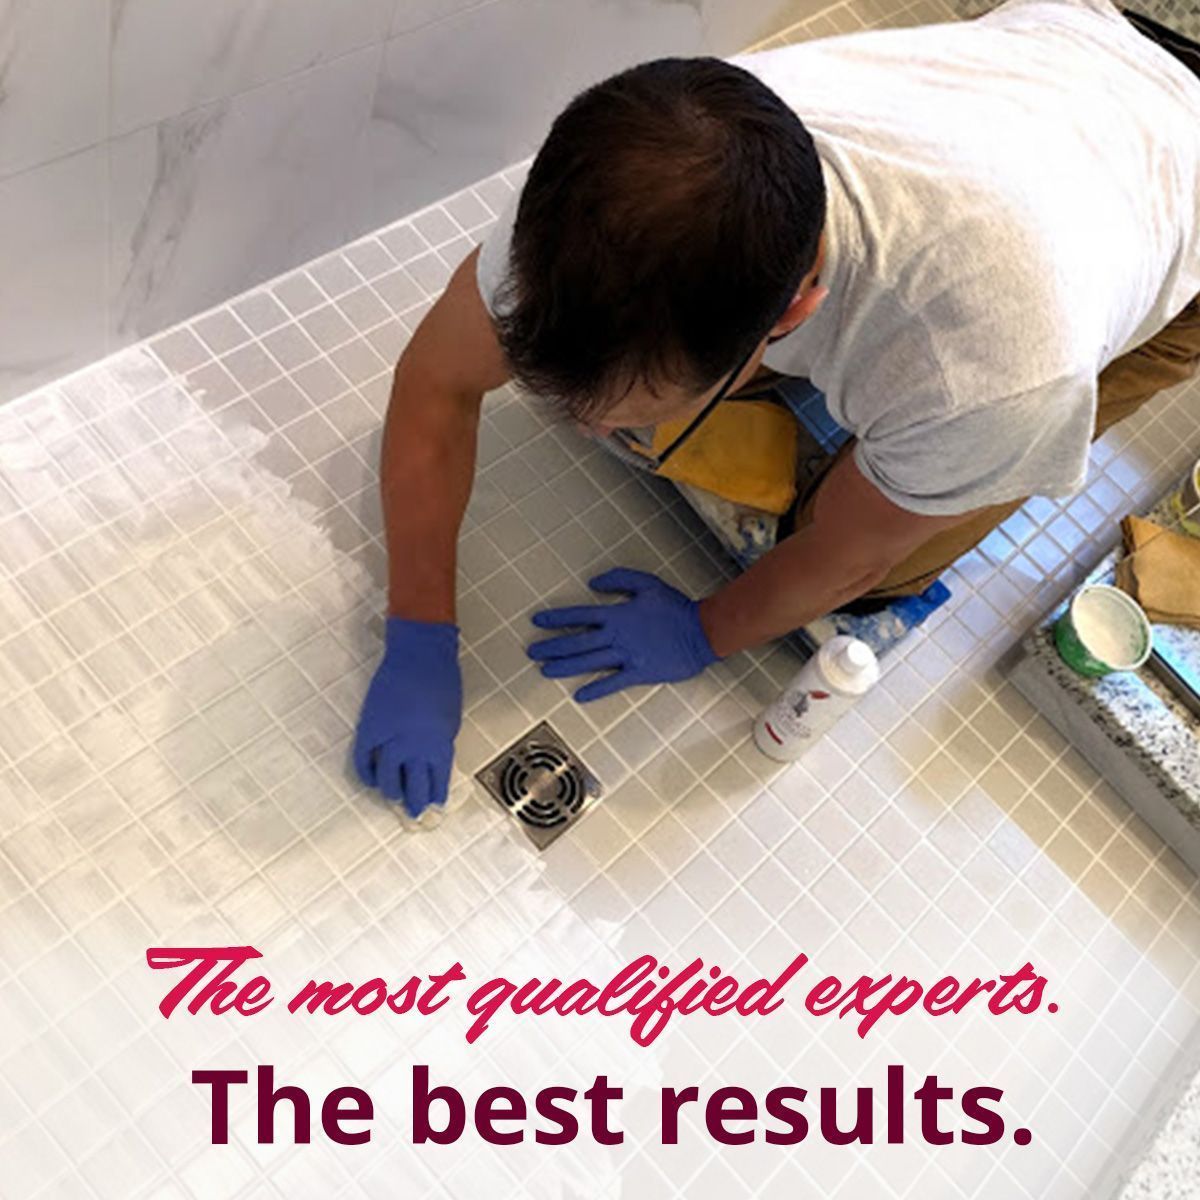 The most qualified experts. The best results.